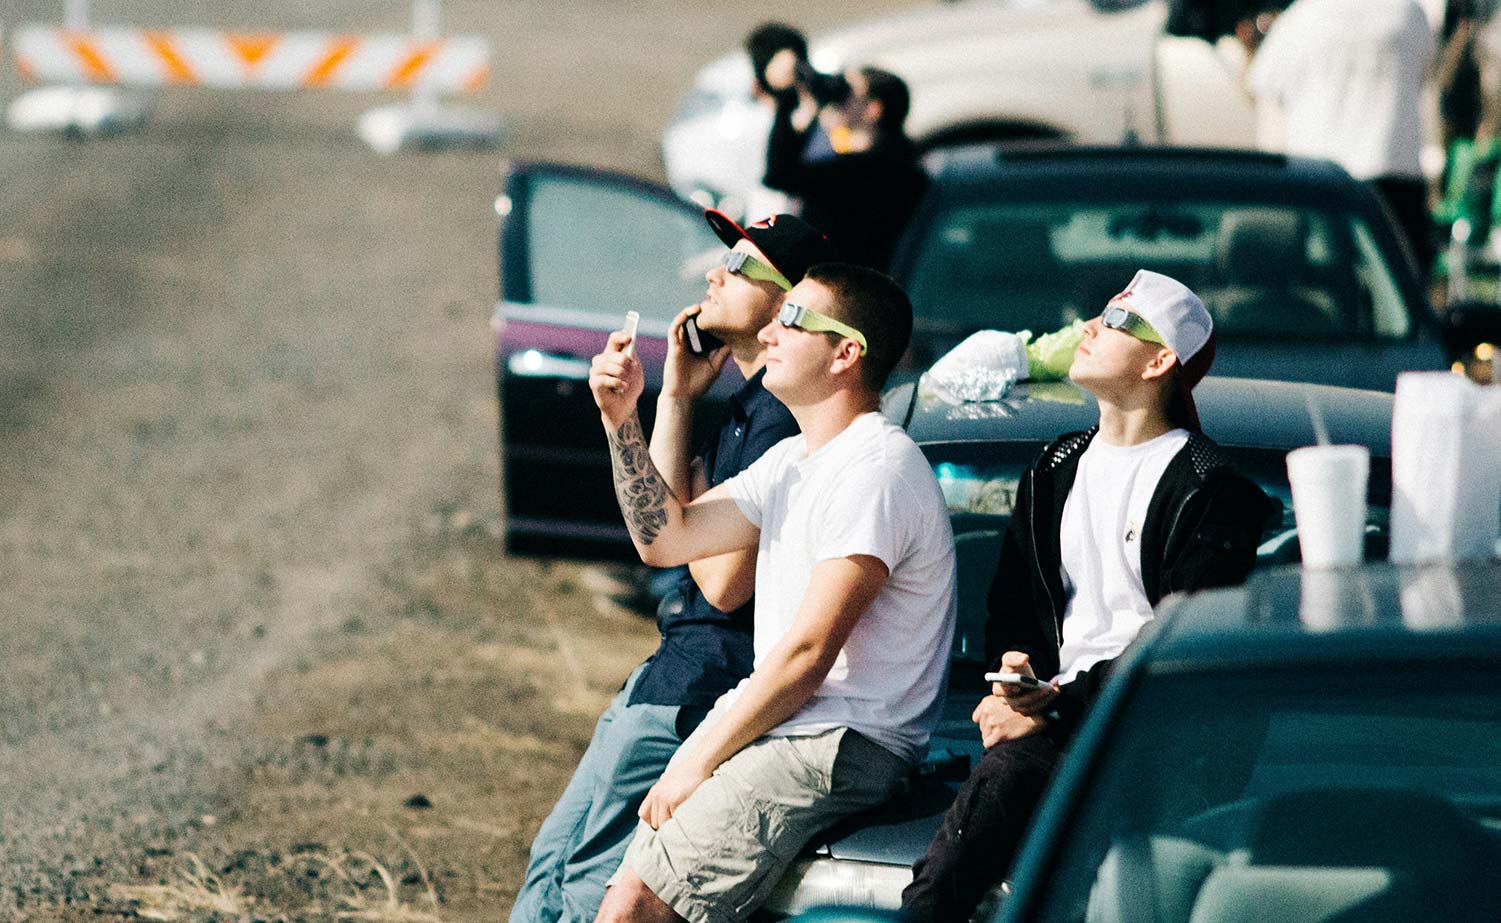 People viewing solar eclipse in the US